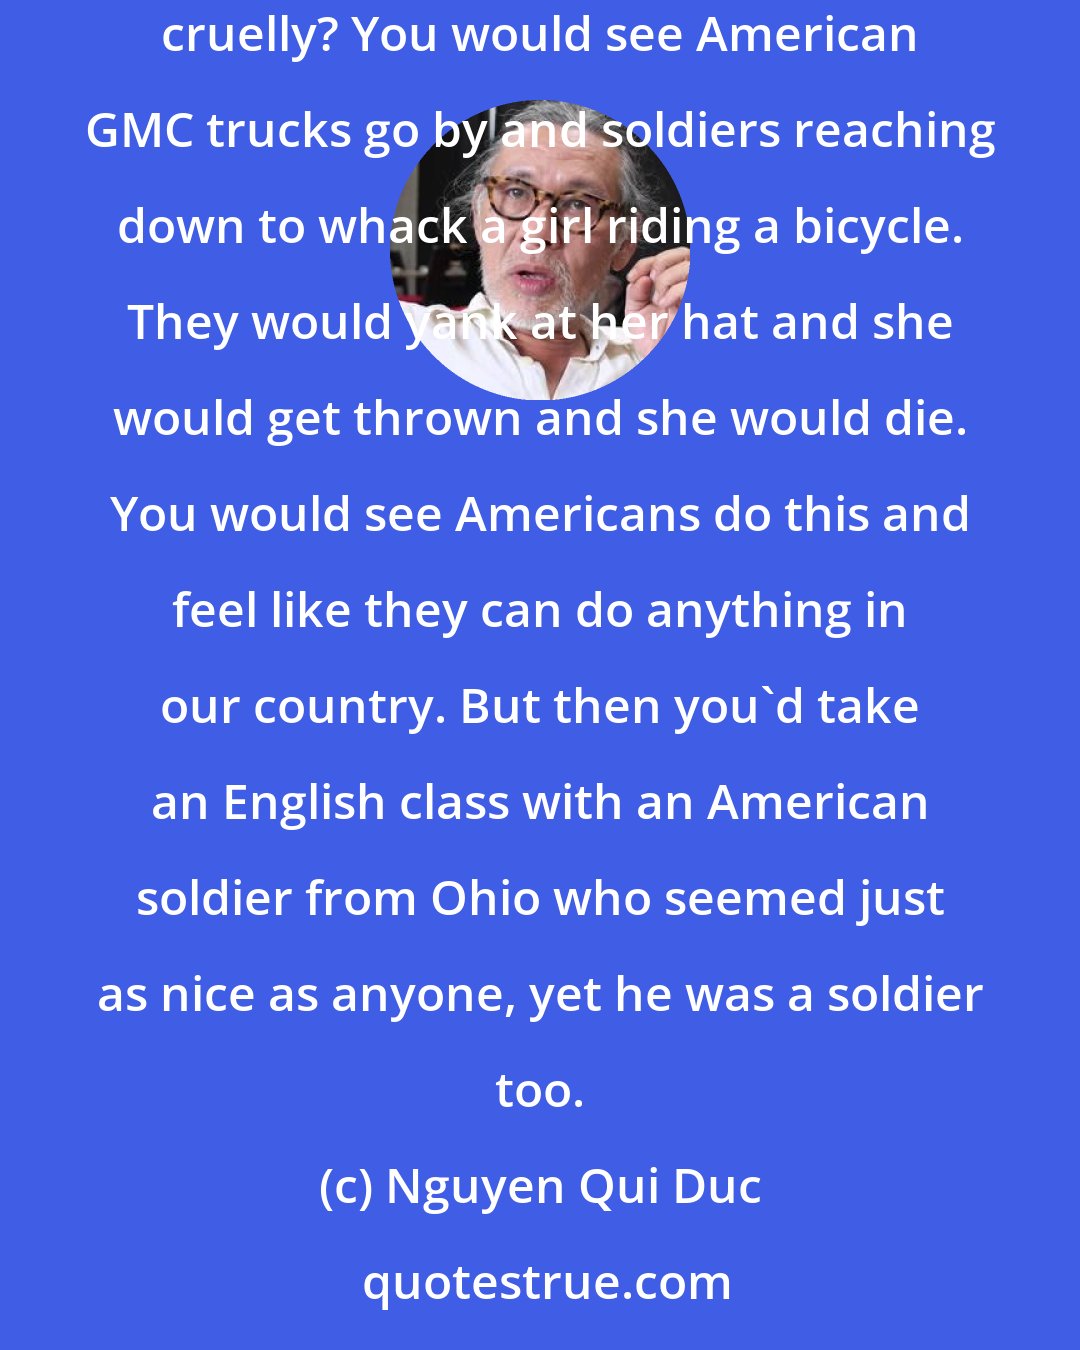 Nguyen Qui Duc: At some point my friends and I began to ask, how can a country that produced hippies and such cool people also fight a war and kill people and act cruelly? You would see American GMC trucks go by and soldiers reaching down to whack a girl riding a bicycle. They would yank at her hat and she would get thrown and she would die. You would see Americans do this and feel like they can do anything in our country. But then you'd take an English class with an American soldier from Ohio who seemed just as nice as anyone, yet he was a soldier too.